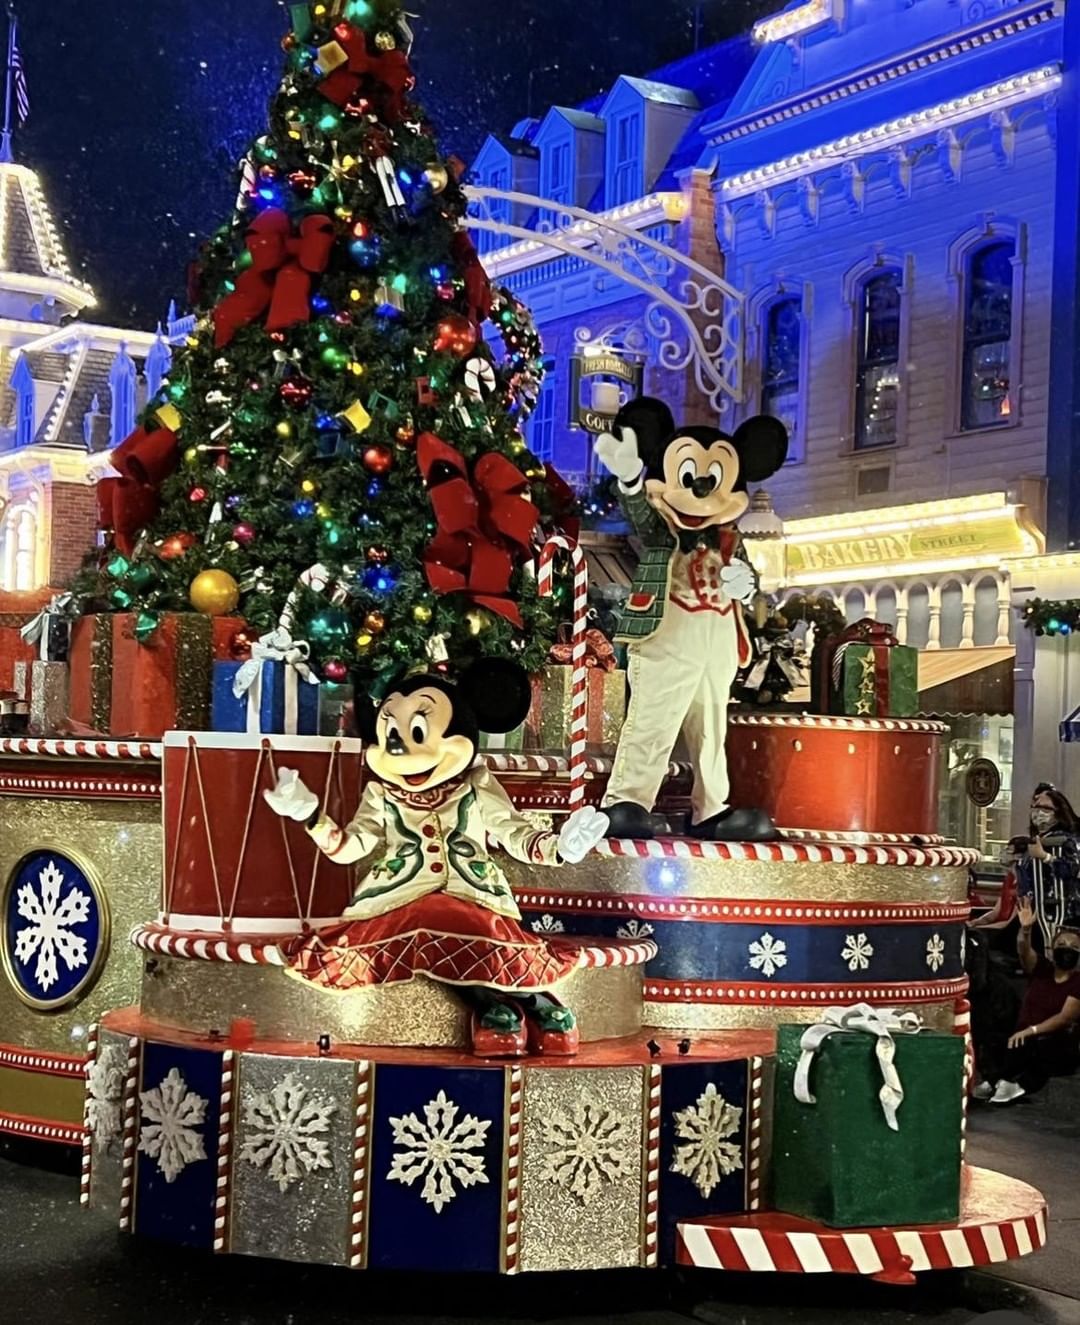 Disney in December - When is the best time to go to Disney?